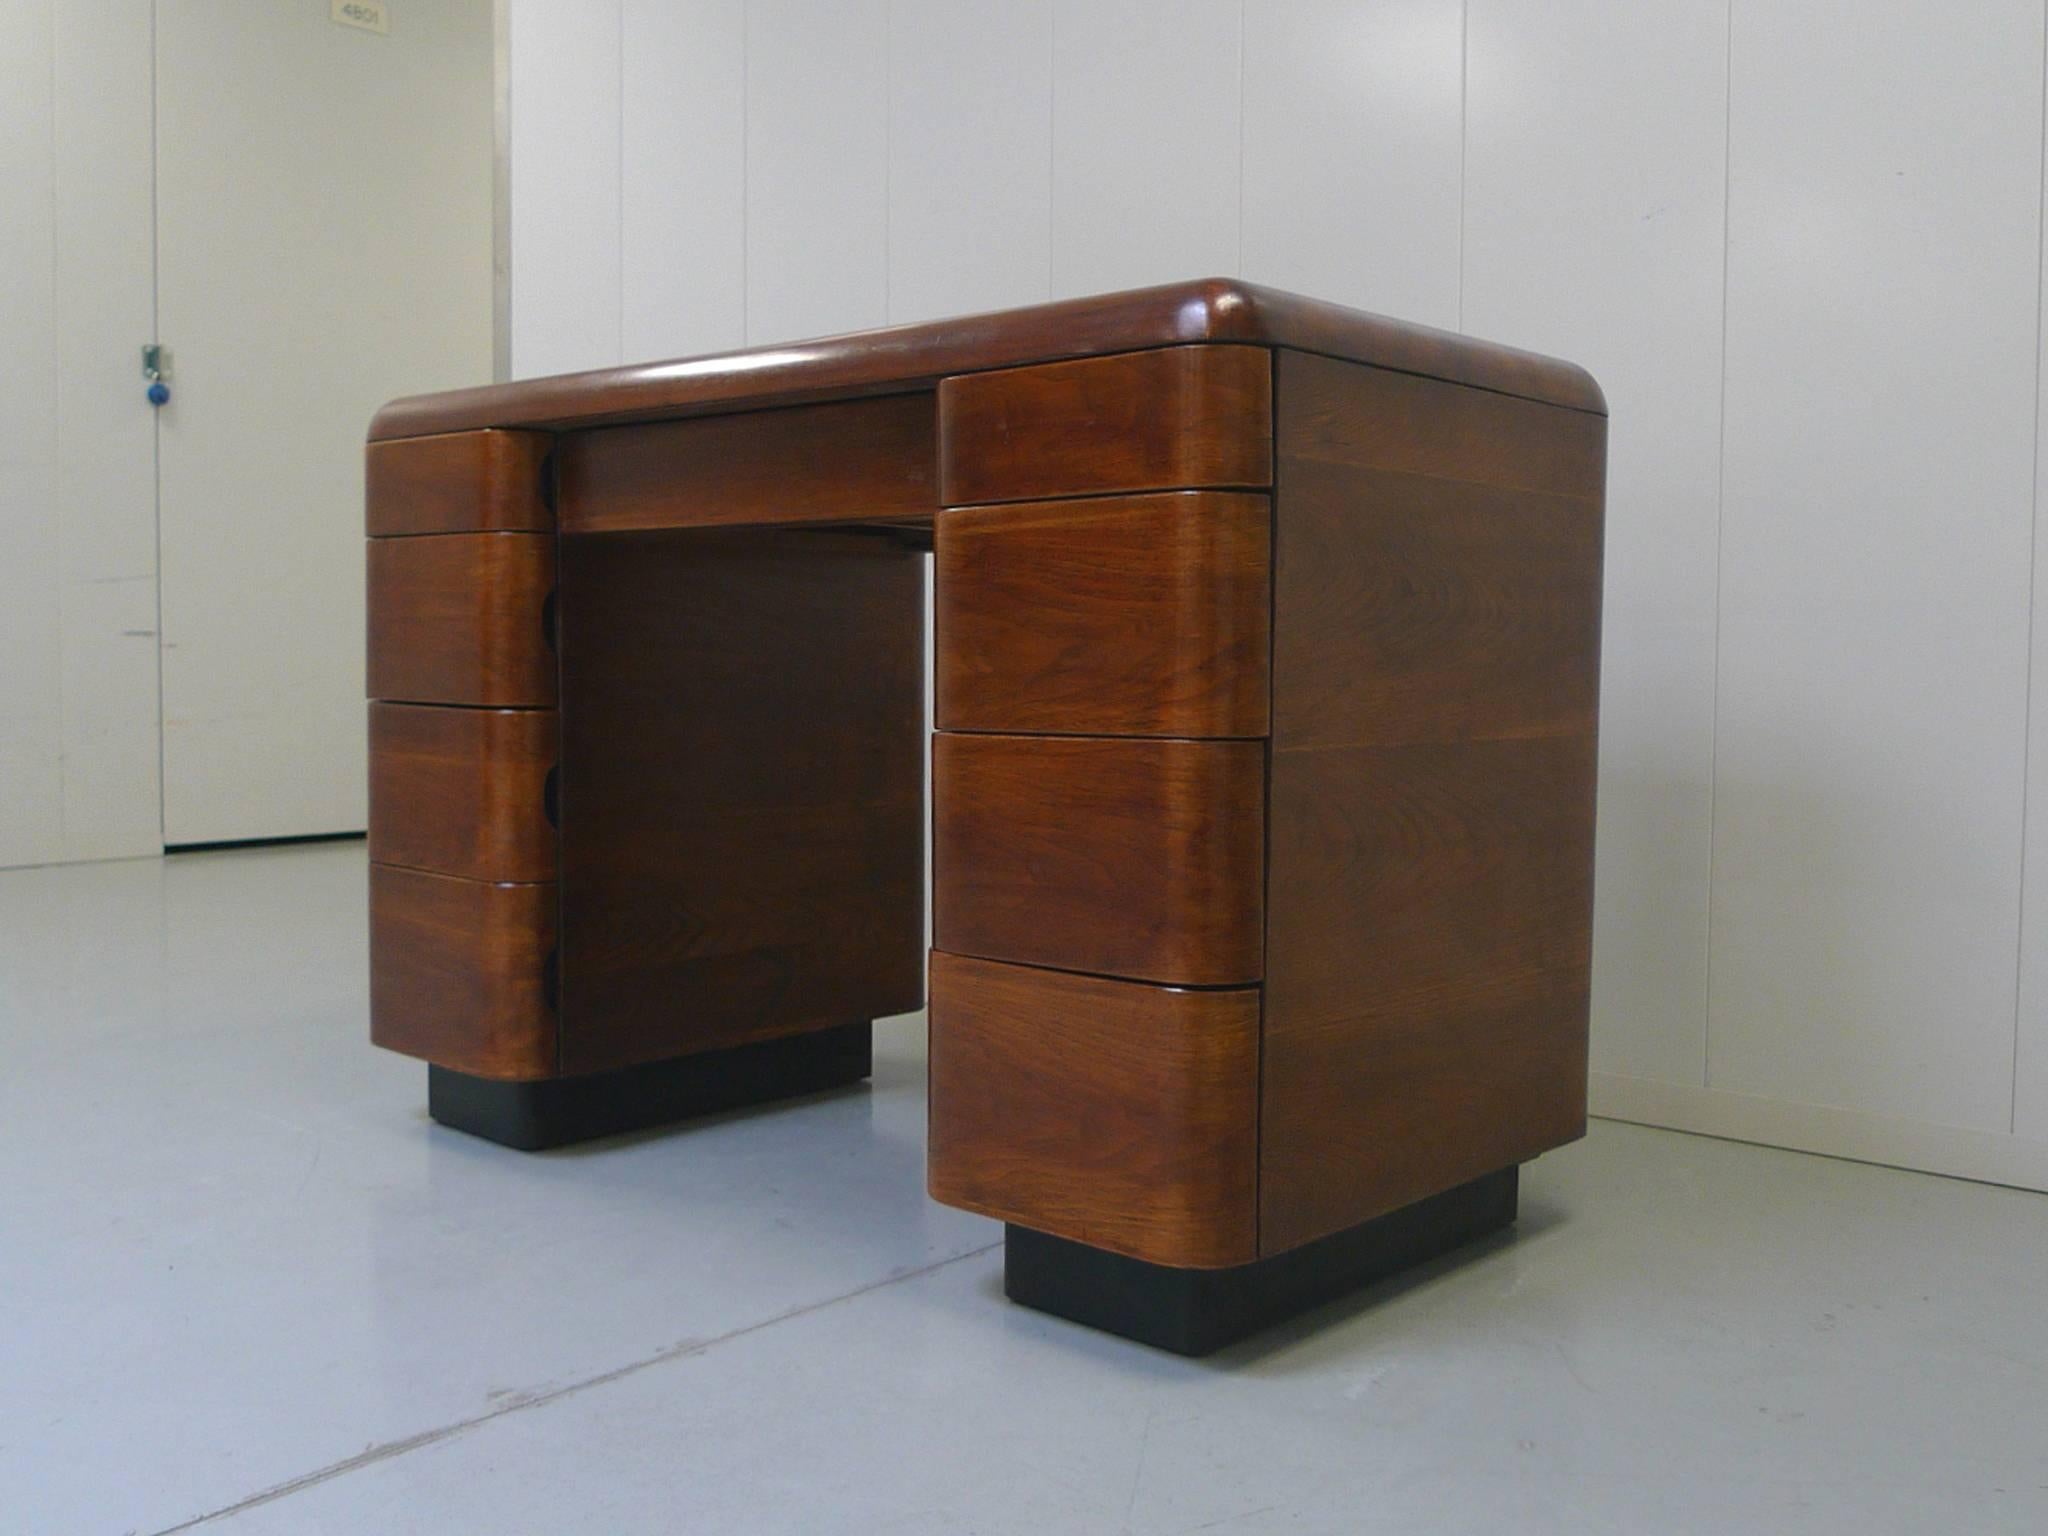 This Art Deco-style desk was designed by Paul Goldman in 1946 for Plymodern Furniture. Goldman was renowned for his use of bent plywood. The process of Plymold allowed for the beautiful curves of this Tanker-like desk to be formed. The bentwood is